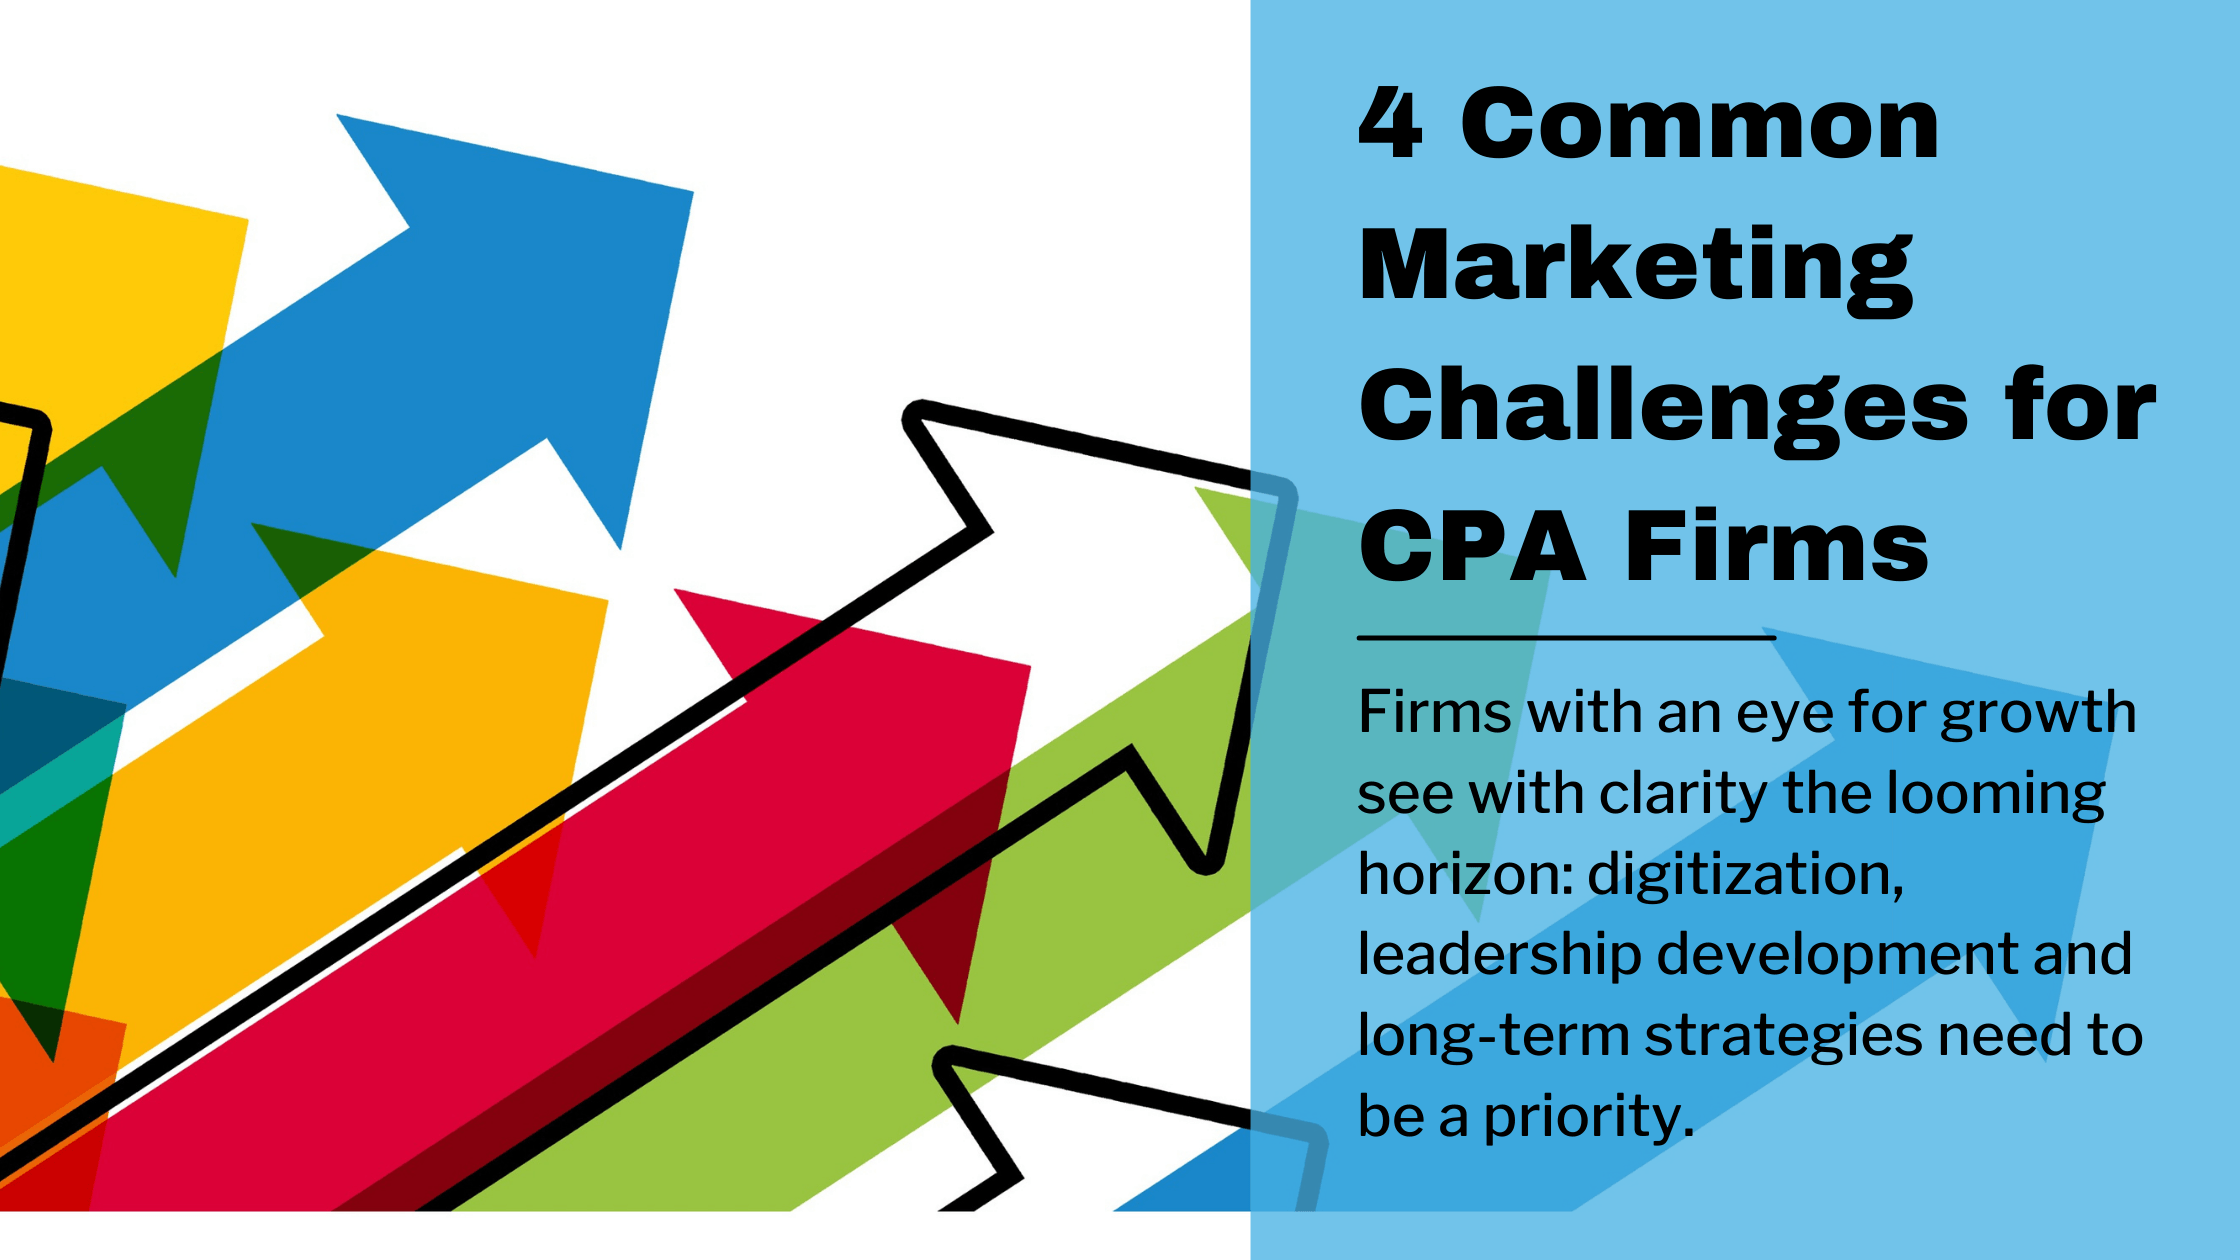 4 Common Marketing Challenges for CPA Firms